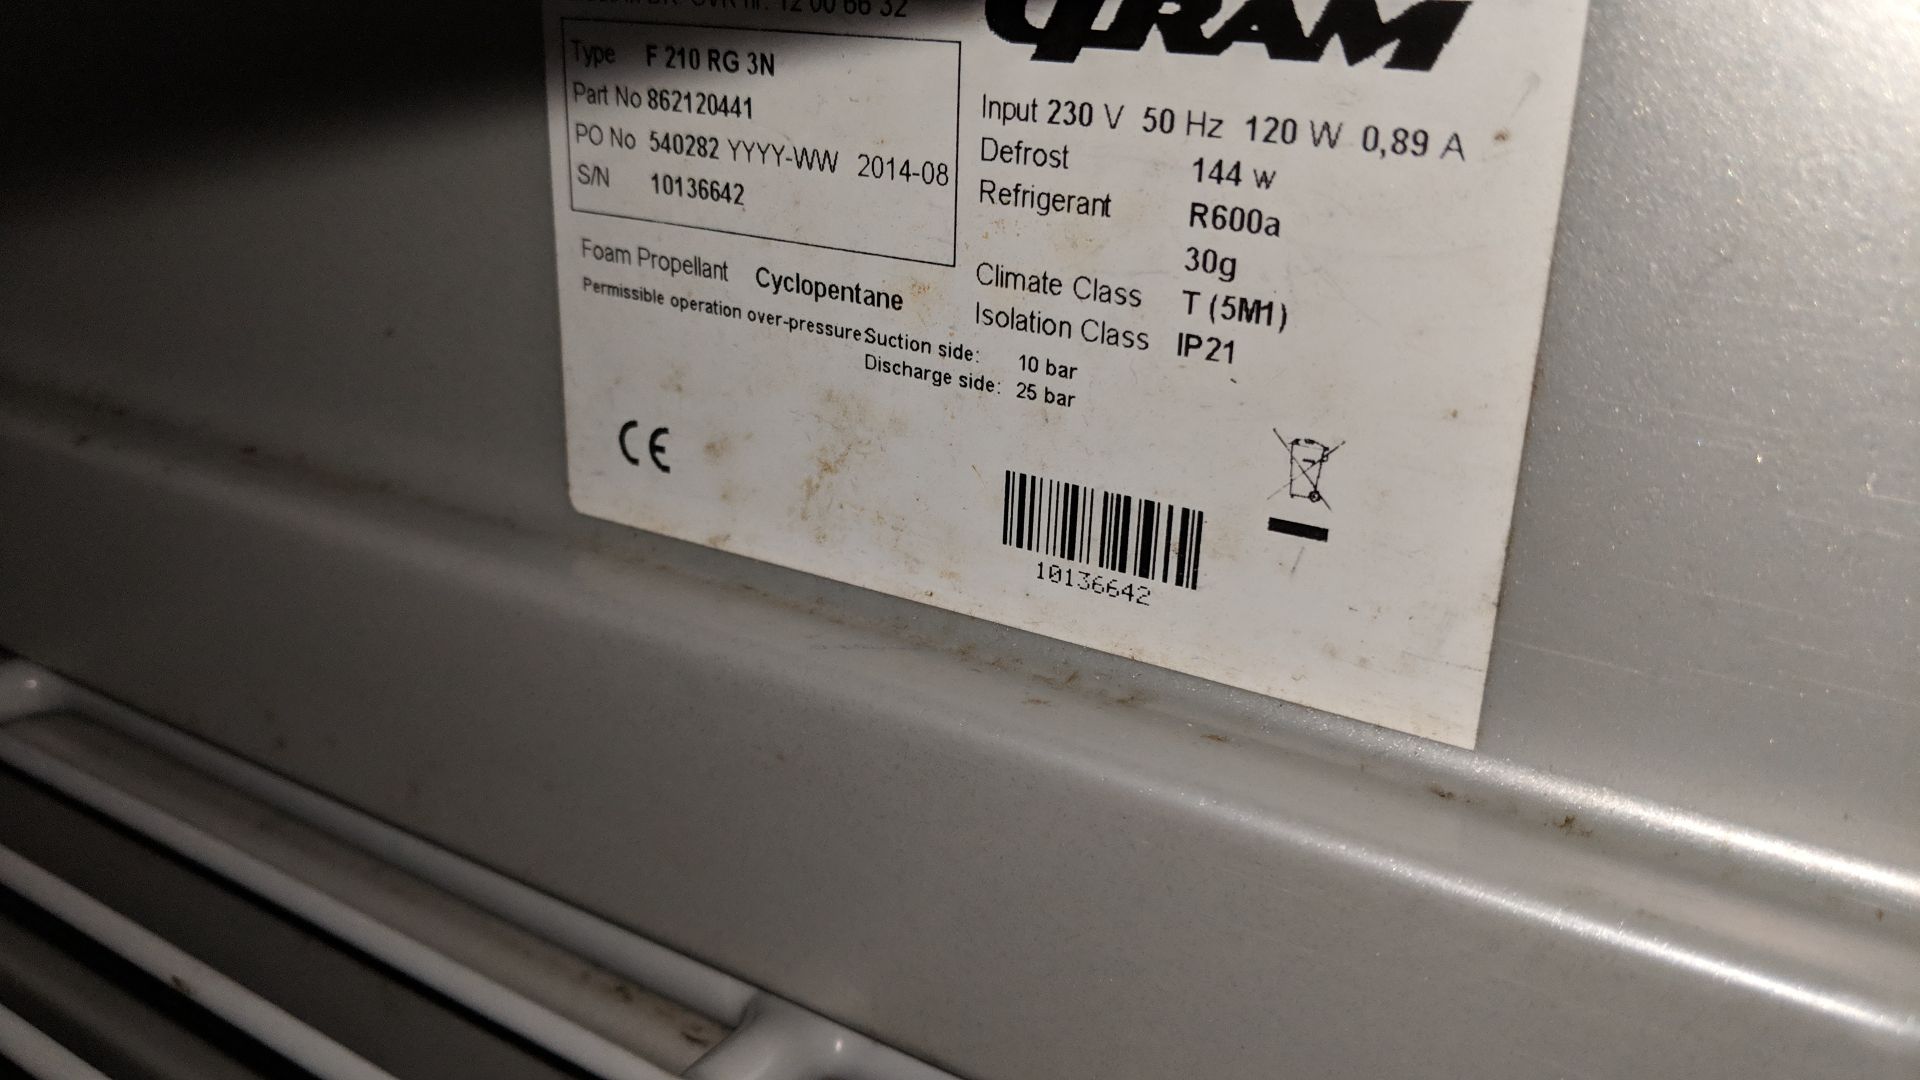 Gram stainless steel under counter fridge IMPORTANT: Please remember goods successfully bid upon - Image 4 of 5